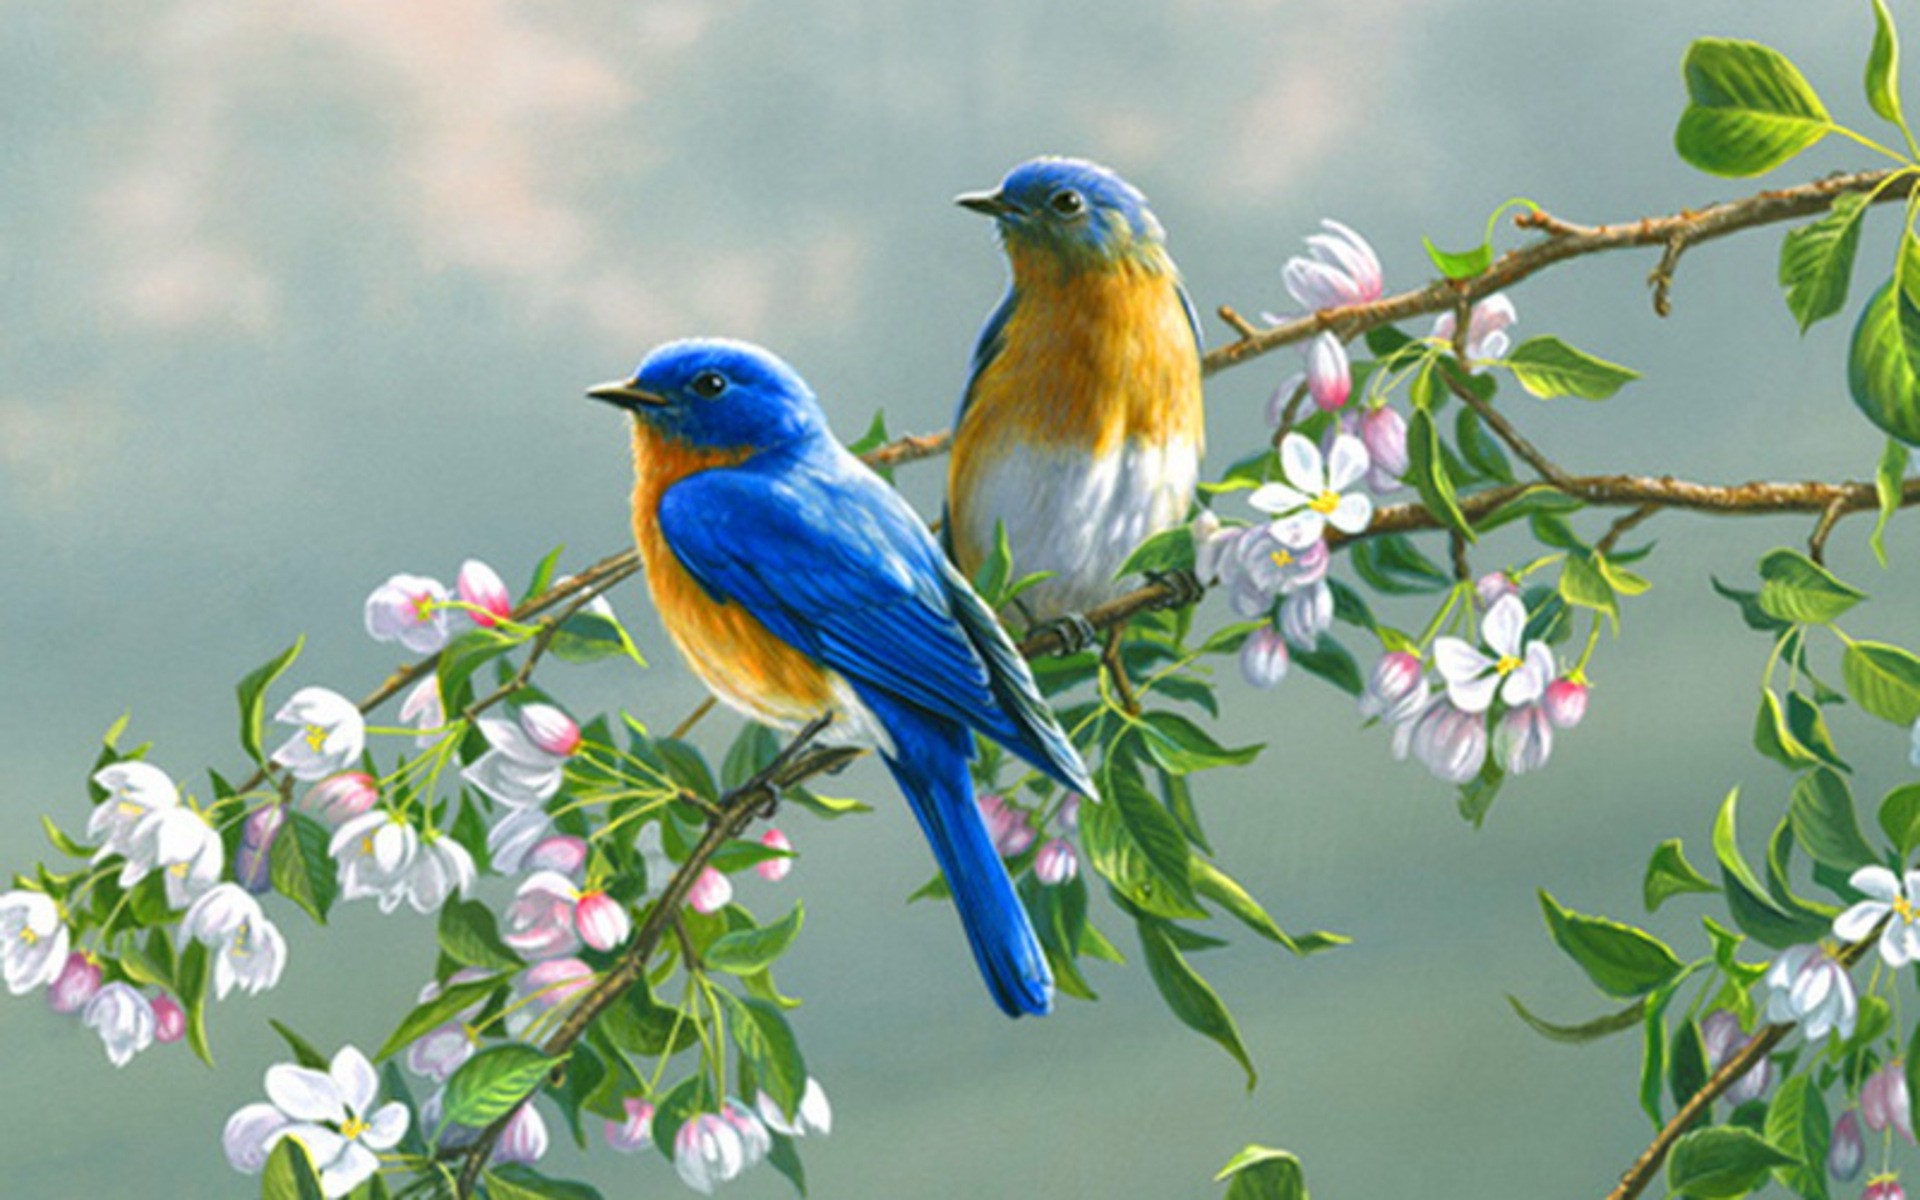 Wallpapers with animals and birds –